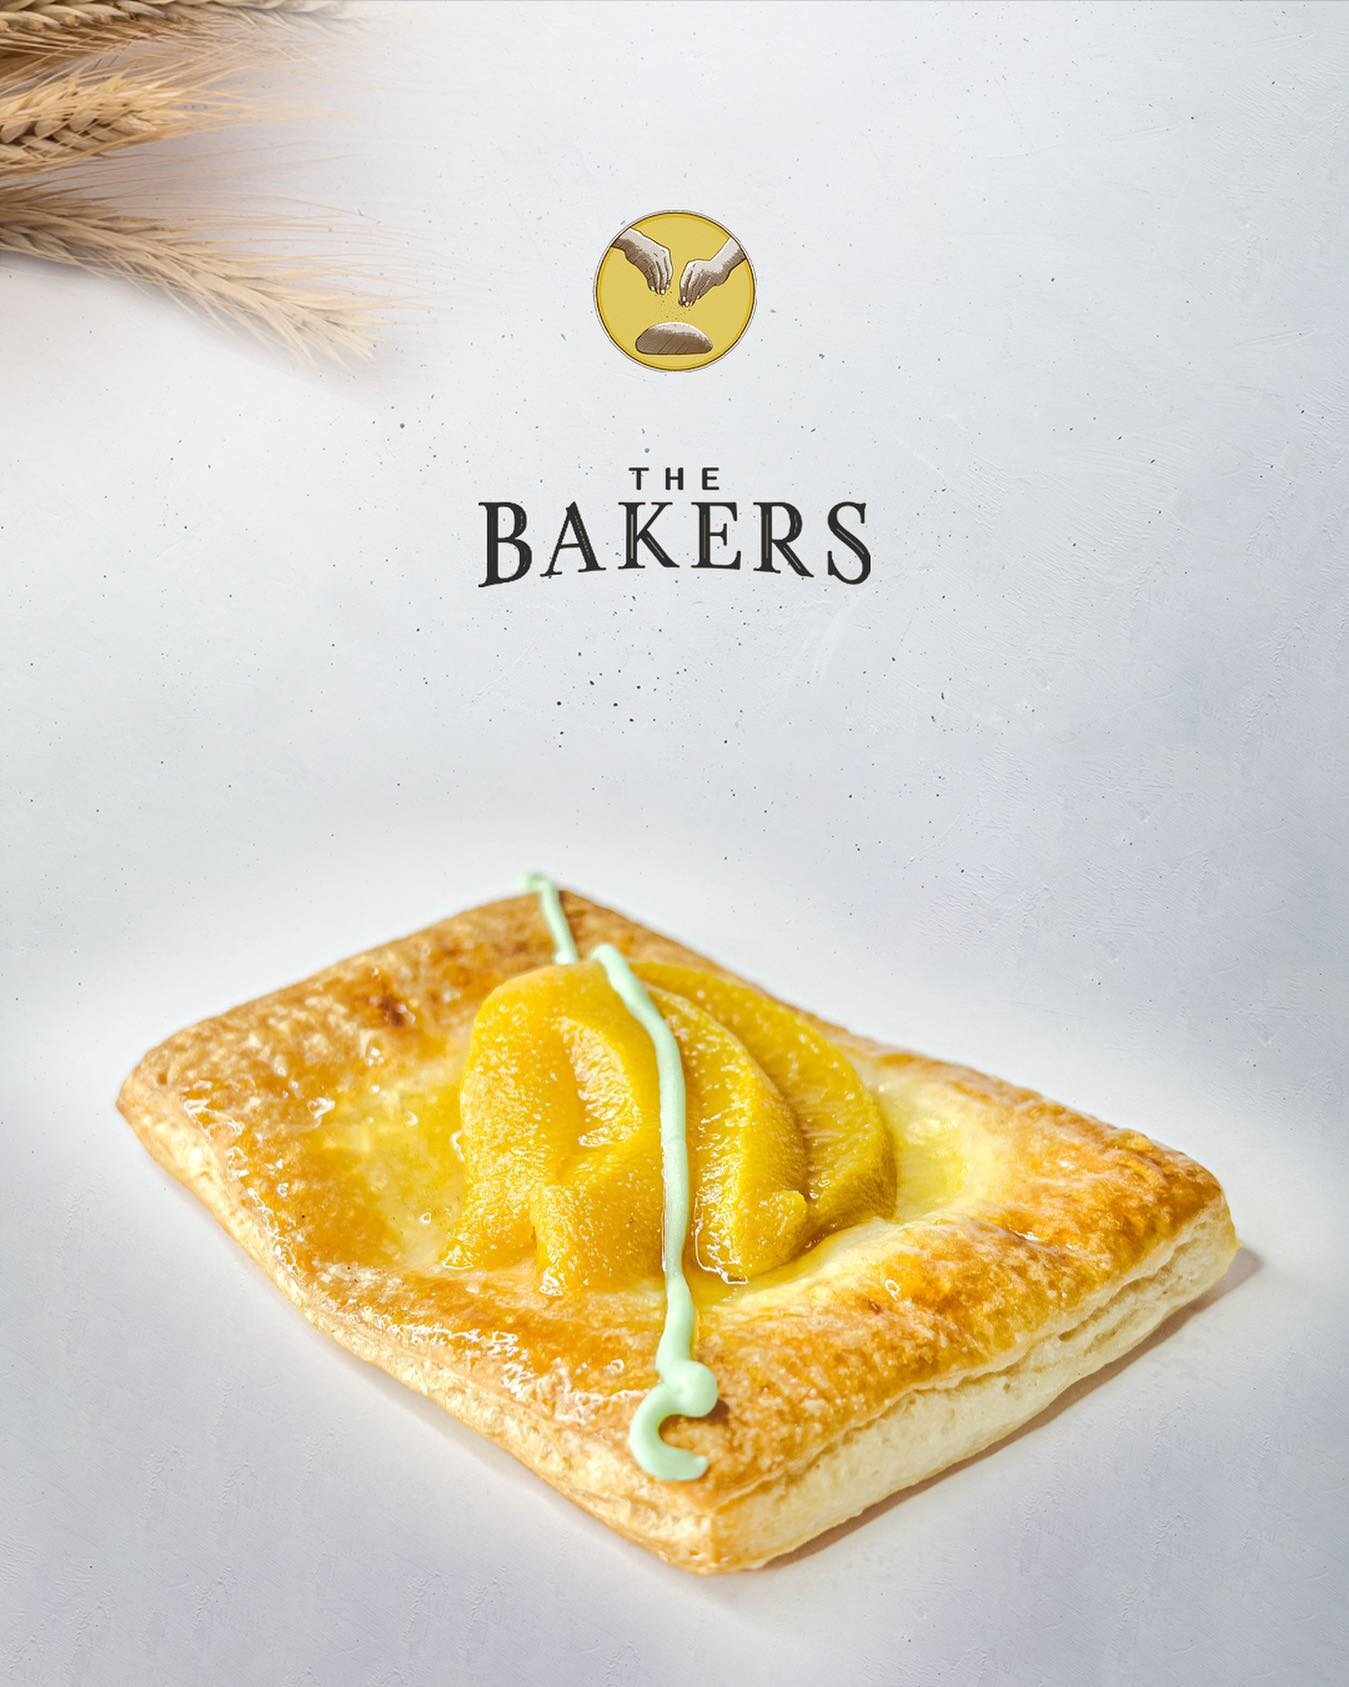 Sweet, juicy peaches wrapped in Thebakers Pastry.